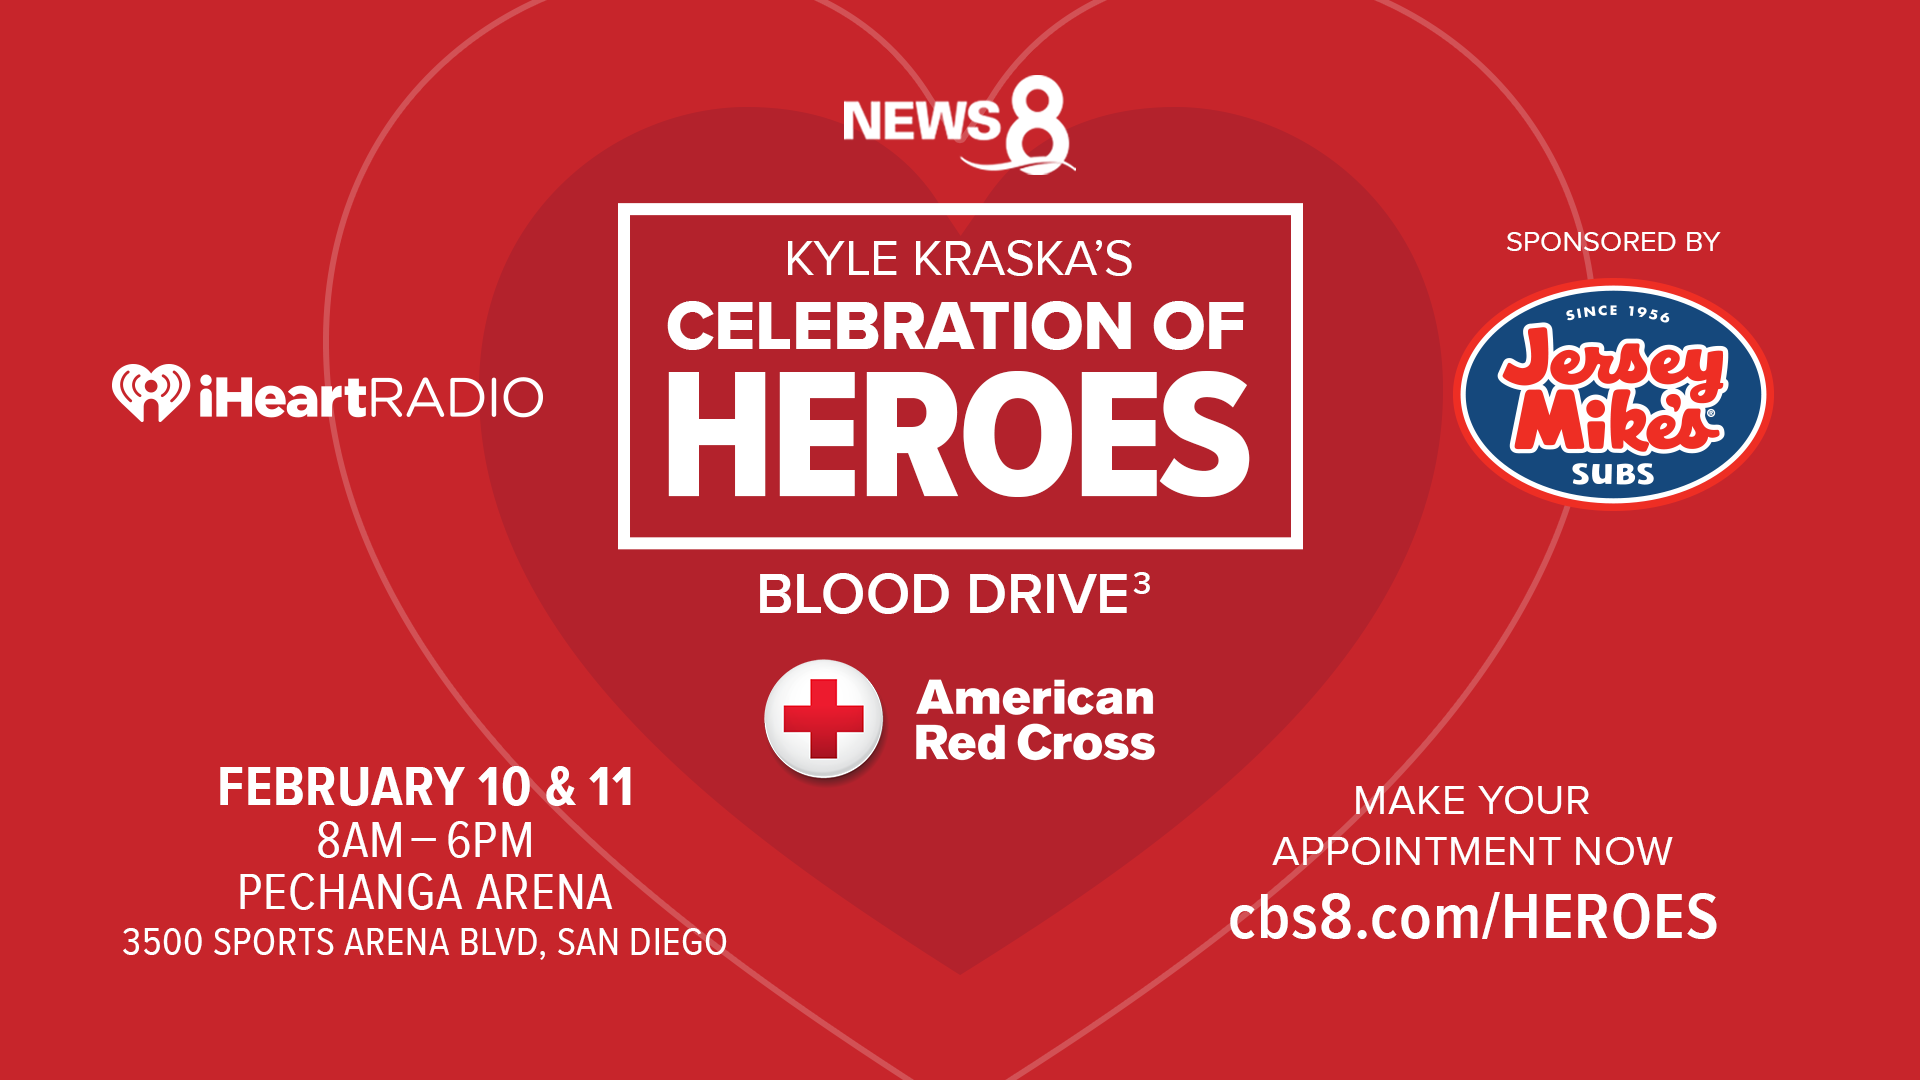 News 8 Sports Director Kyle Kraska joined The Four to talk about the upcoming blood drive at Pechanga Arena on Feb 10 and 11. cbs8.com/heroes